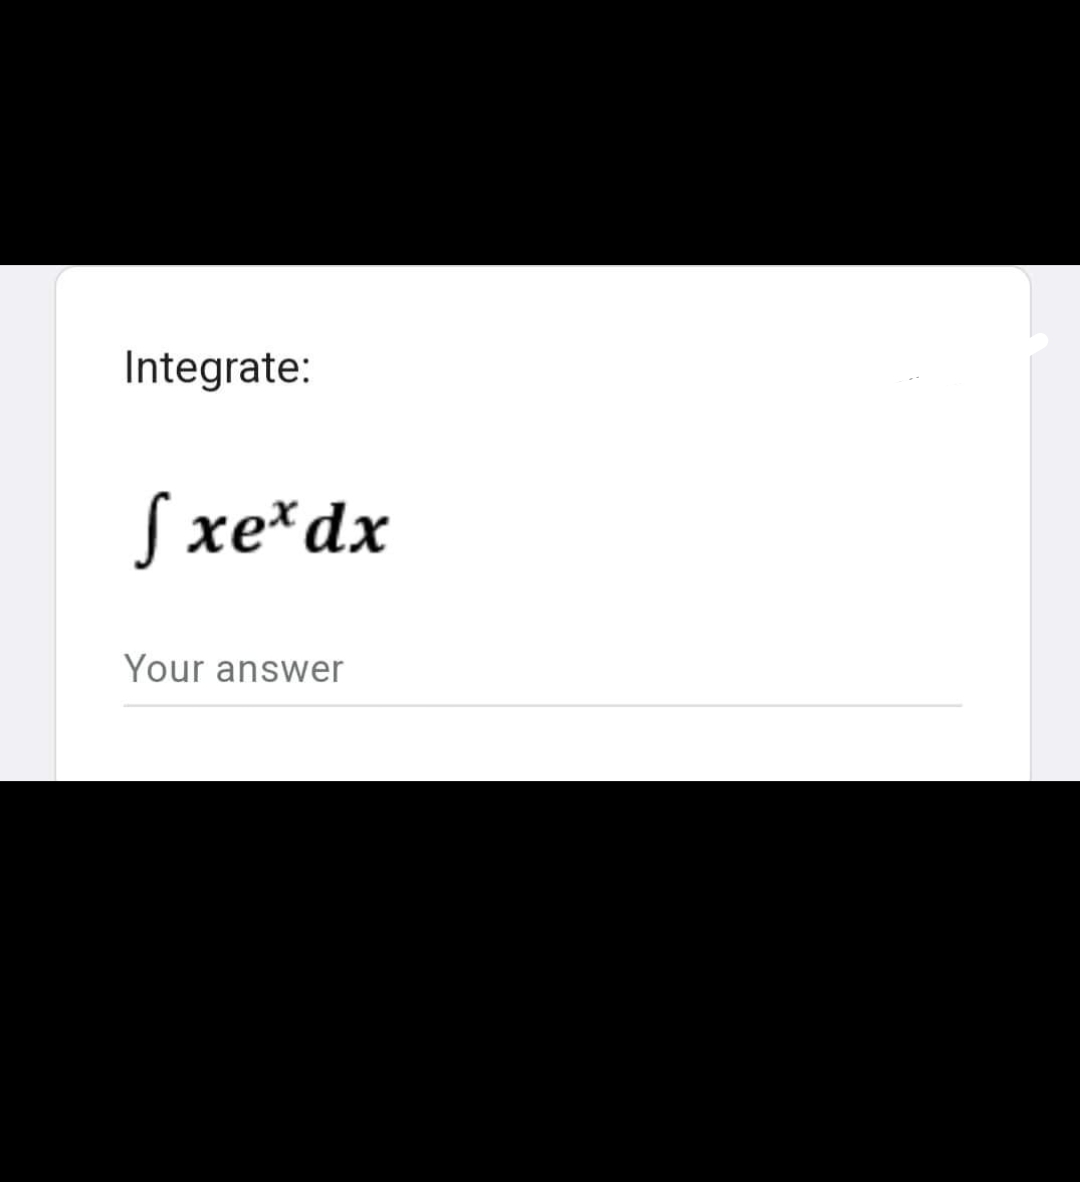 Integrate:
Sxex dx
Your answer